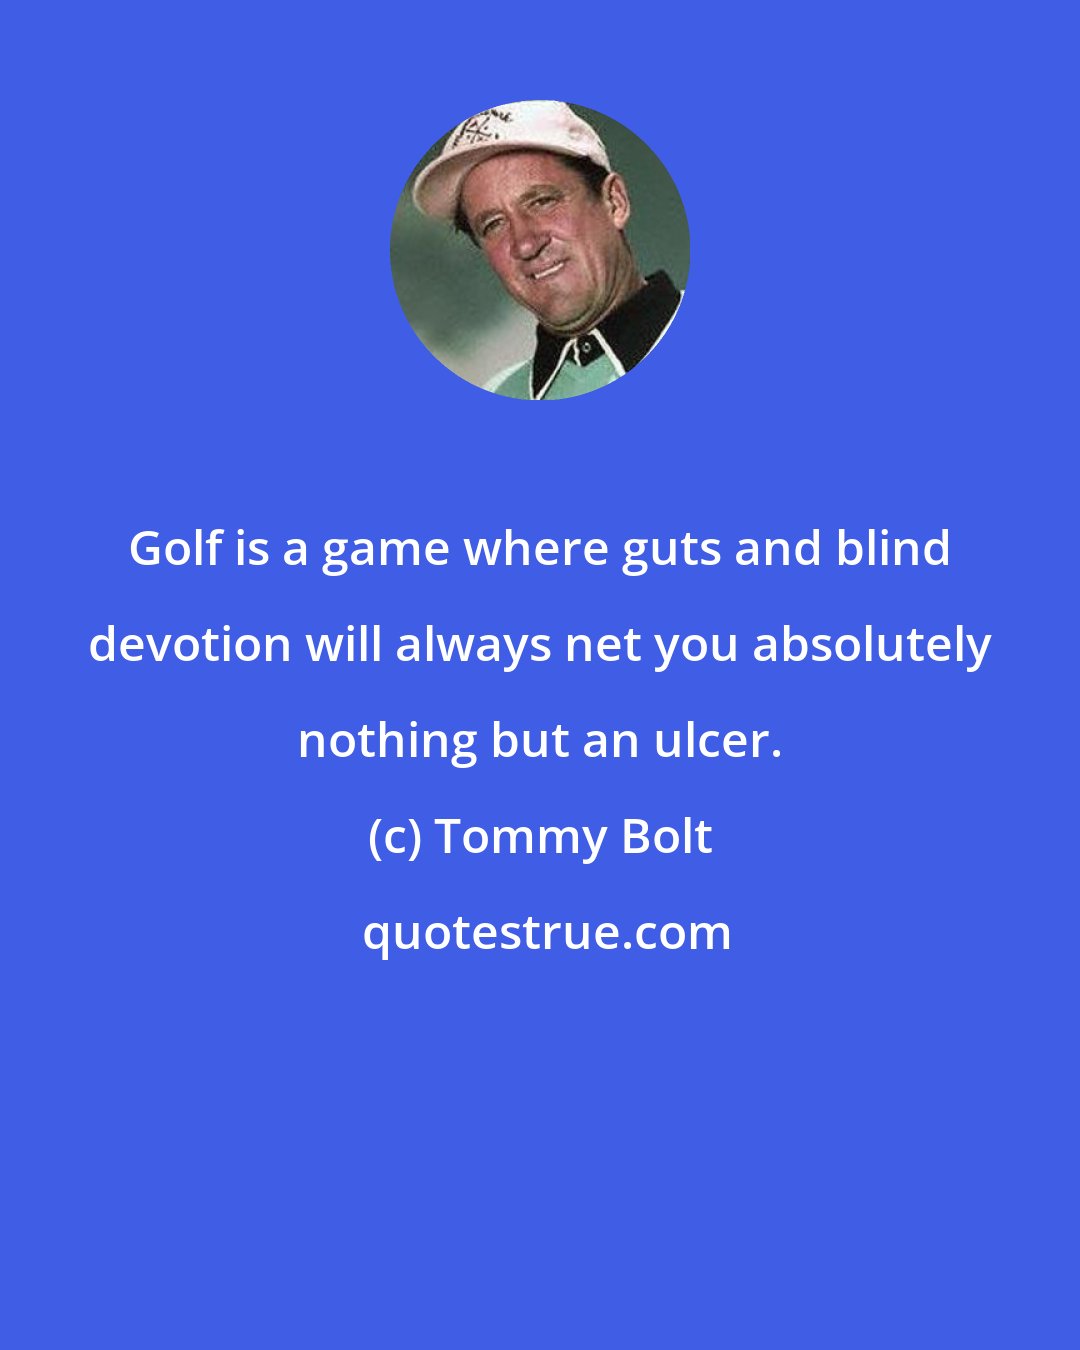 Tommy Bolt: Golf is a game where guts and blind devotion will always net you absolutely nothing but an ulcer.